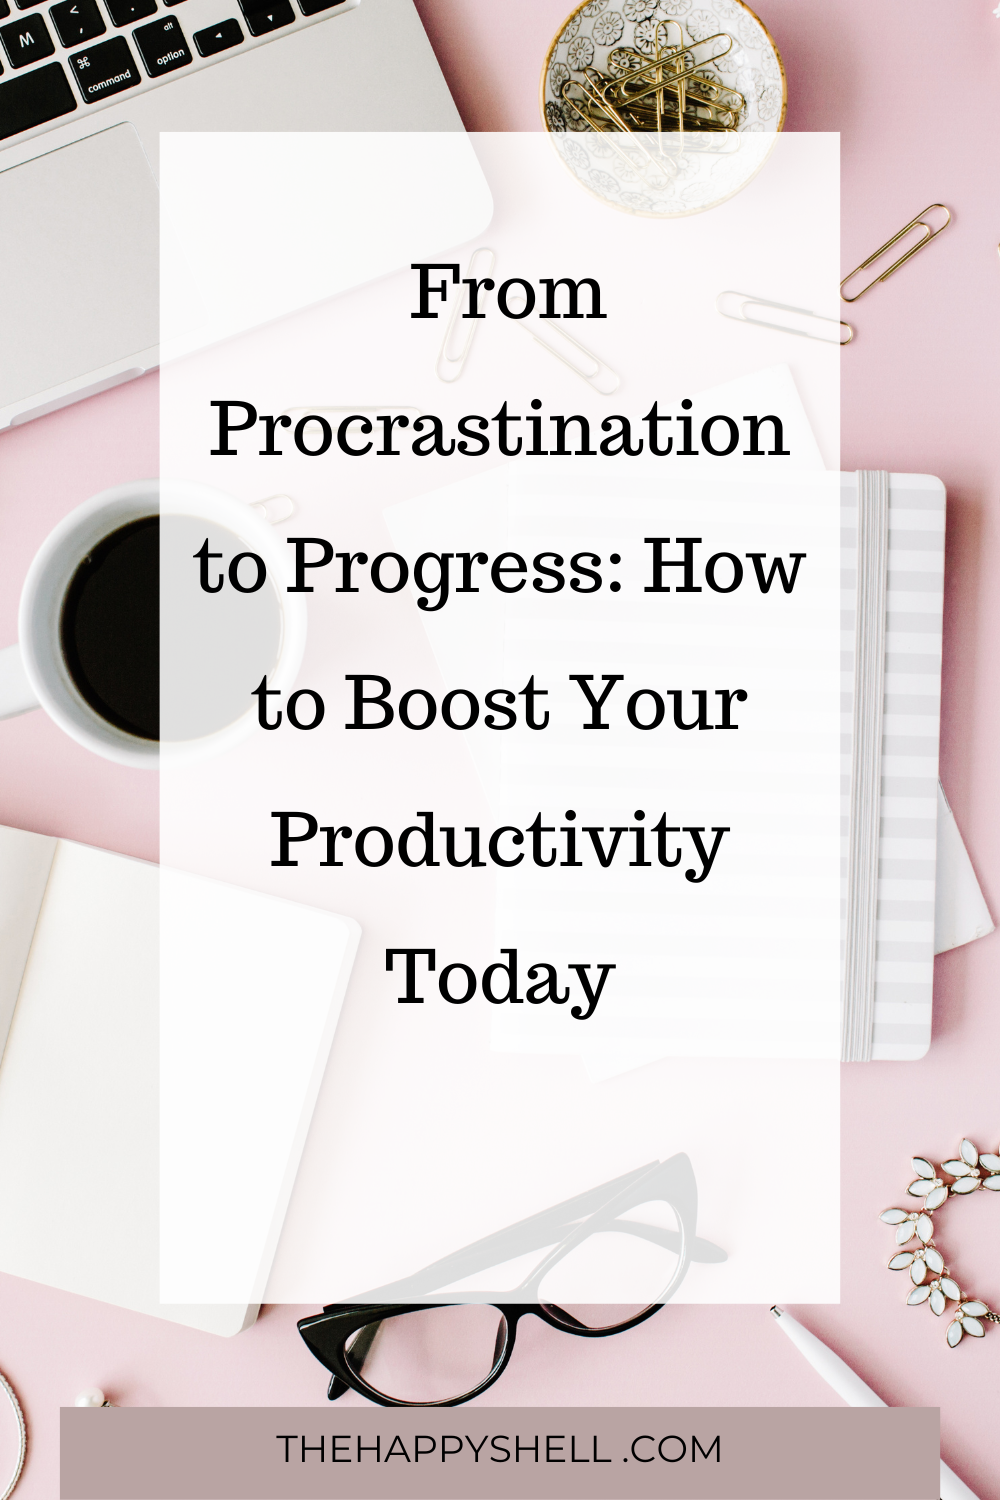 From Procrastination to Progress: How to Boost Your Productivity Today